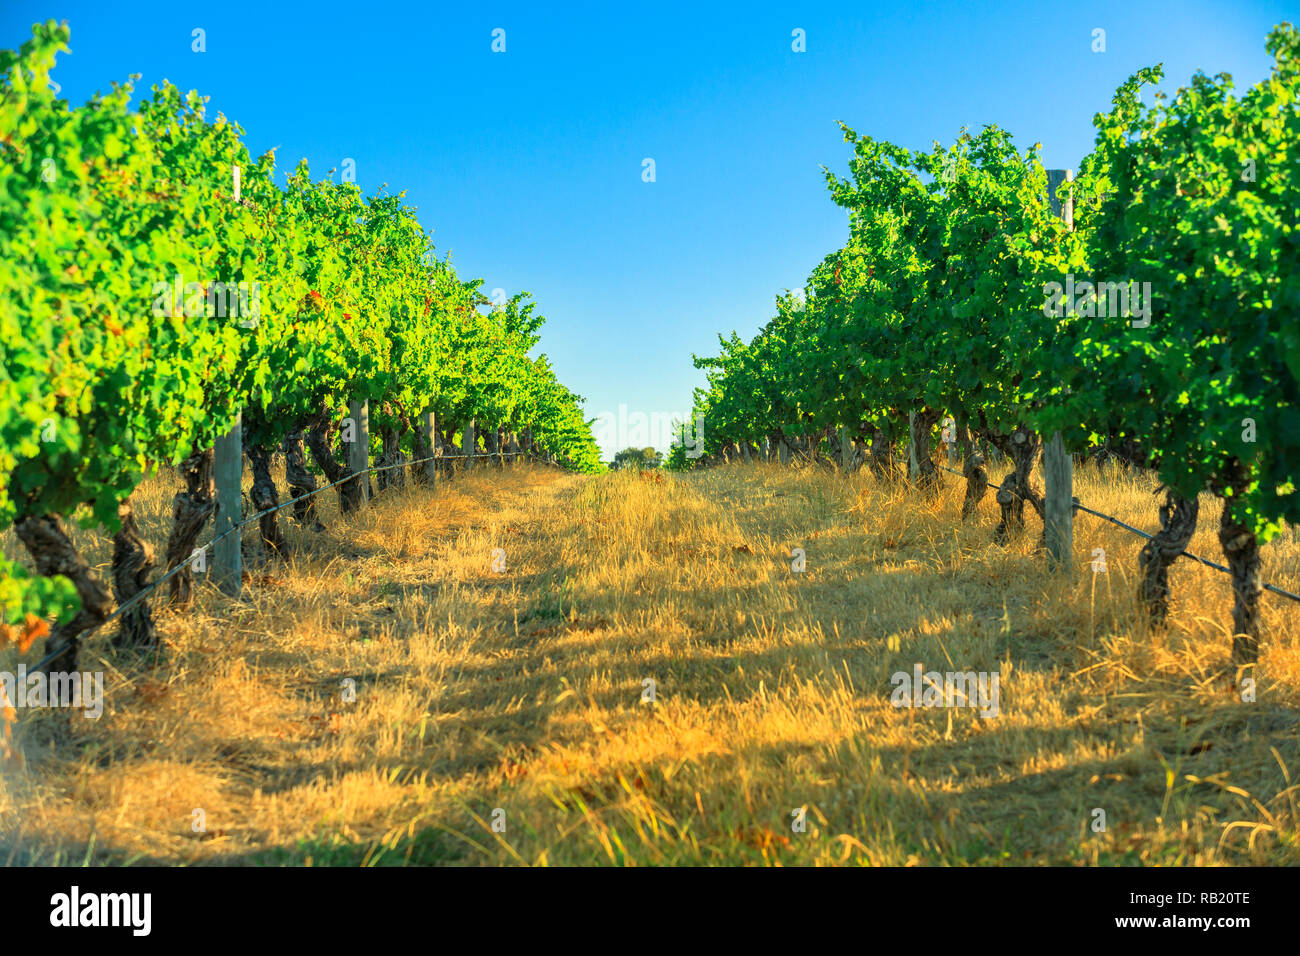 Rows of white grapes in one of many vineyards. Scenic landscape of Wilyabrup in famous Margaret River Wine Region, Western Australia, popular for wine tasting tours. Sunny day with blue sky. Stock Photo